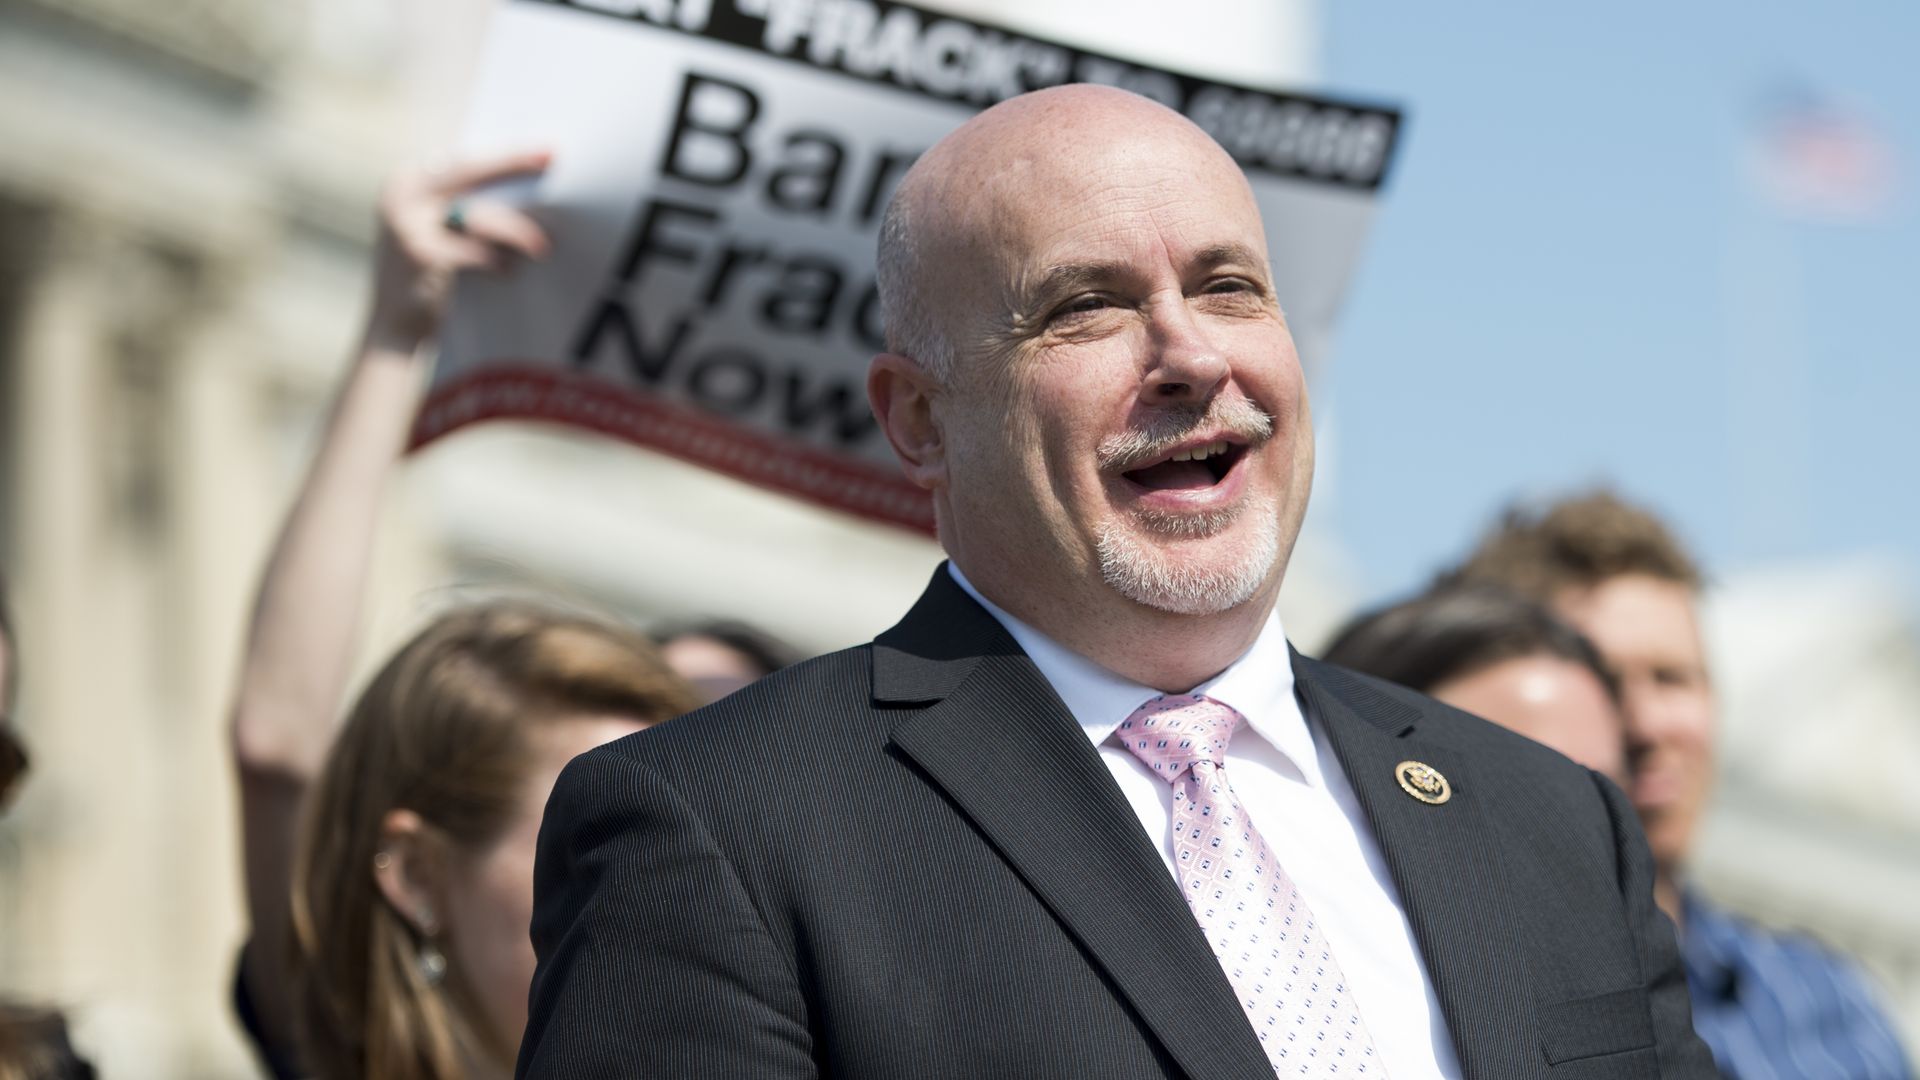 Rep. Mark Pocan is seen speaking outside the U.S. Capitol.